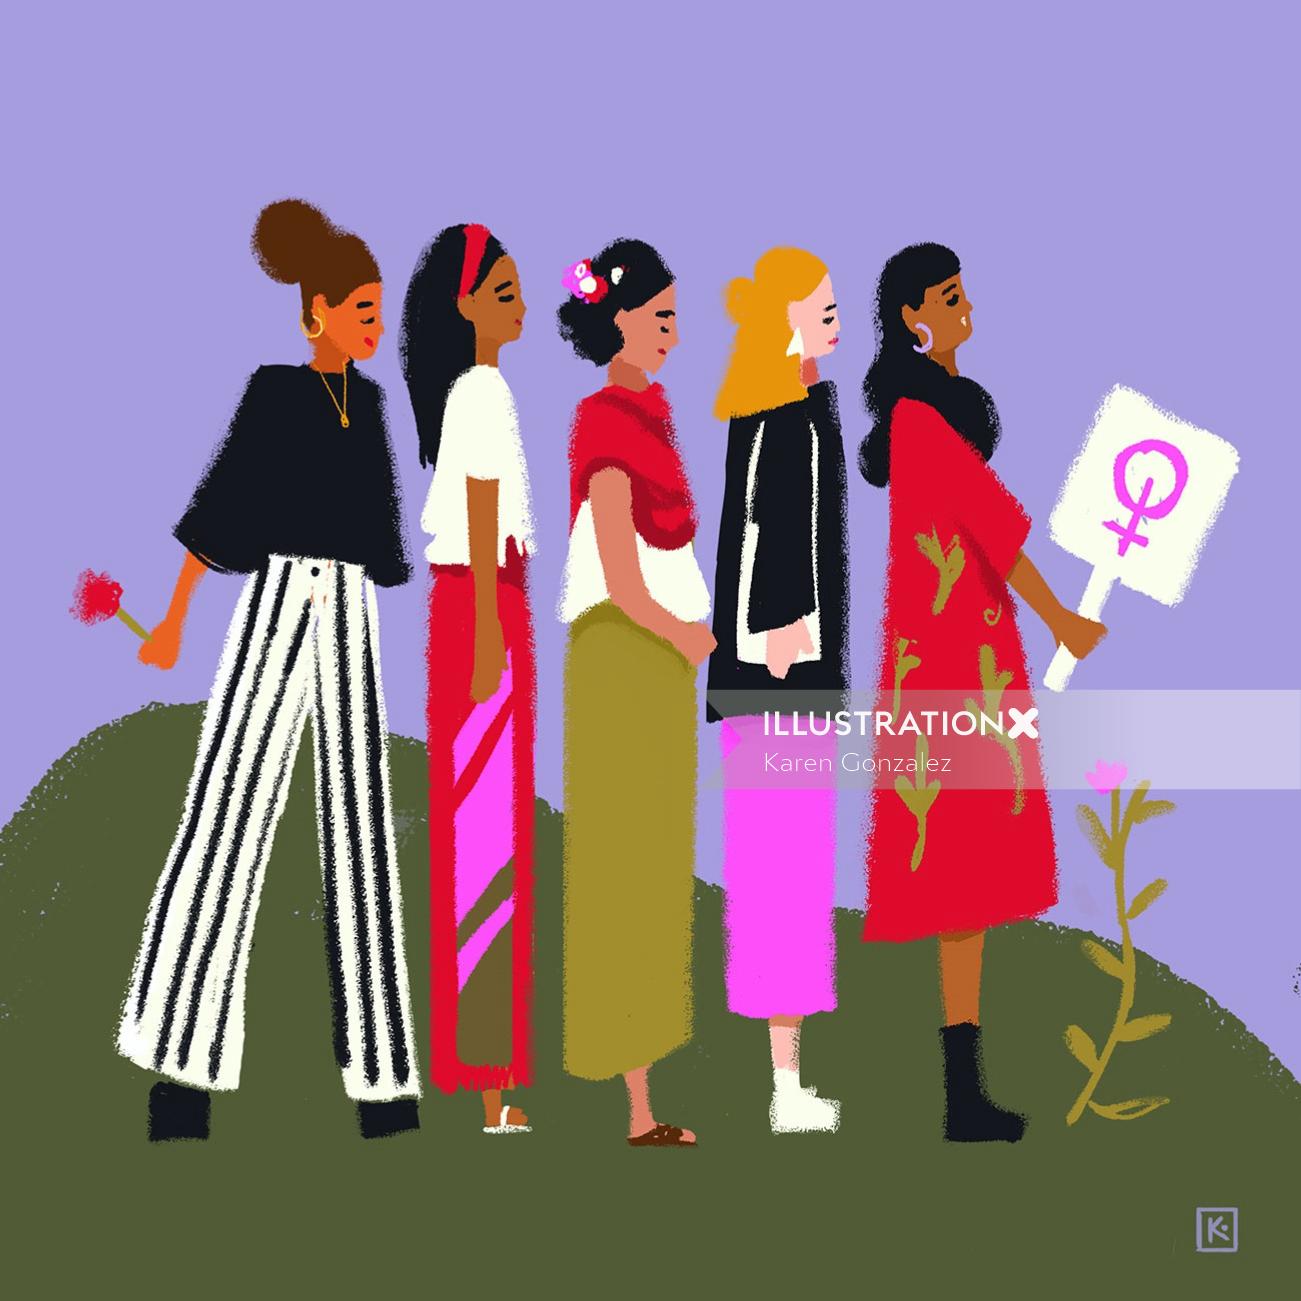 Mexican women illustration for Vogue Mexico Magazine